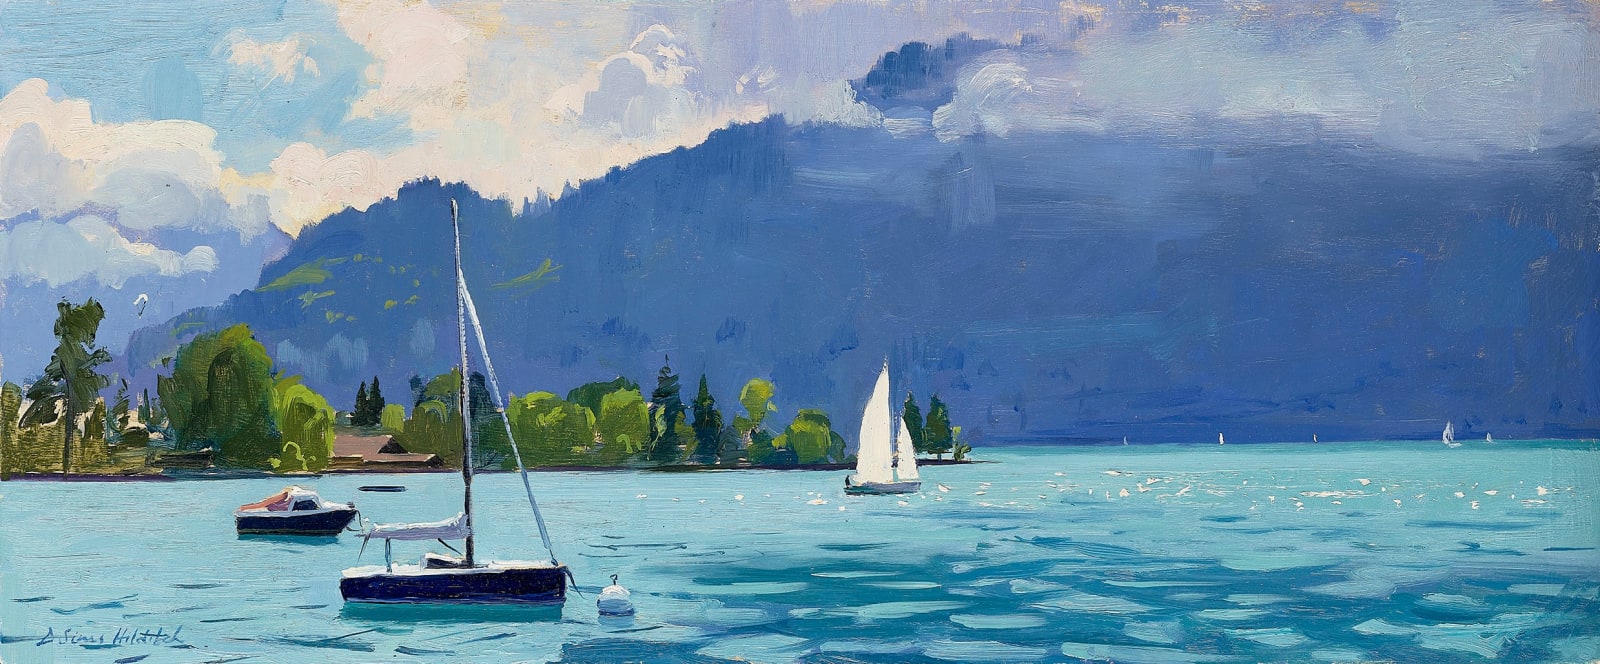 Daisy Sims Hilditch, The White Sail, Thunersee